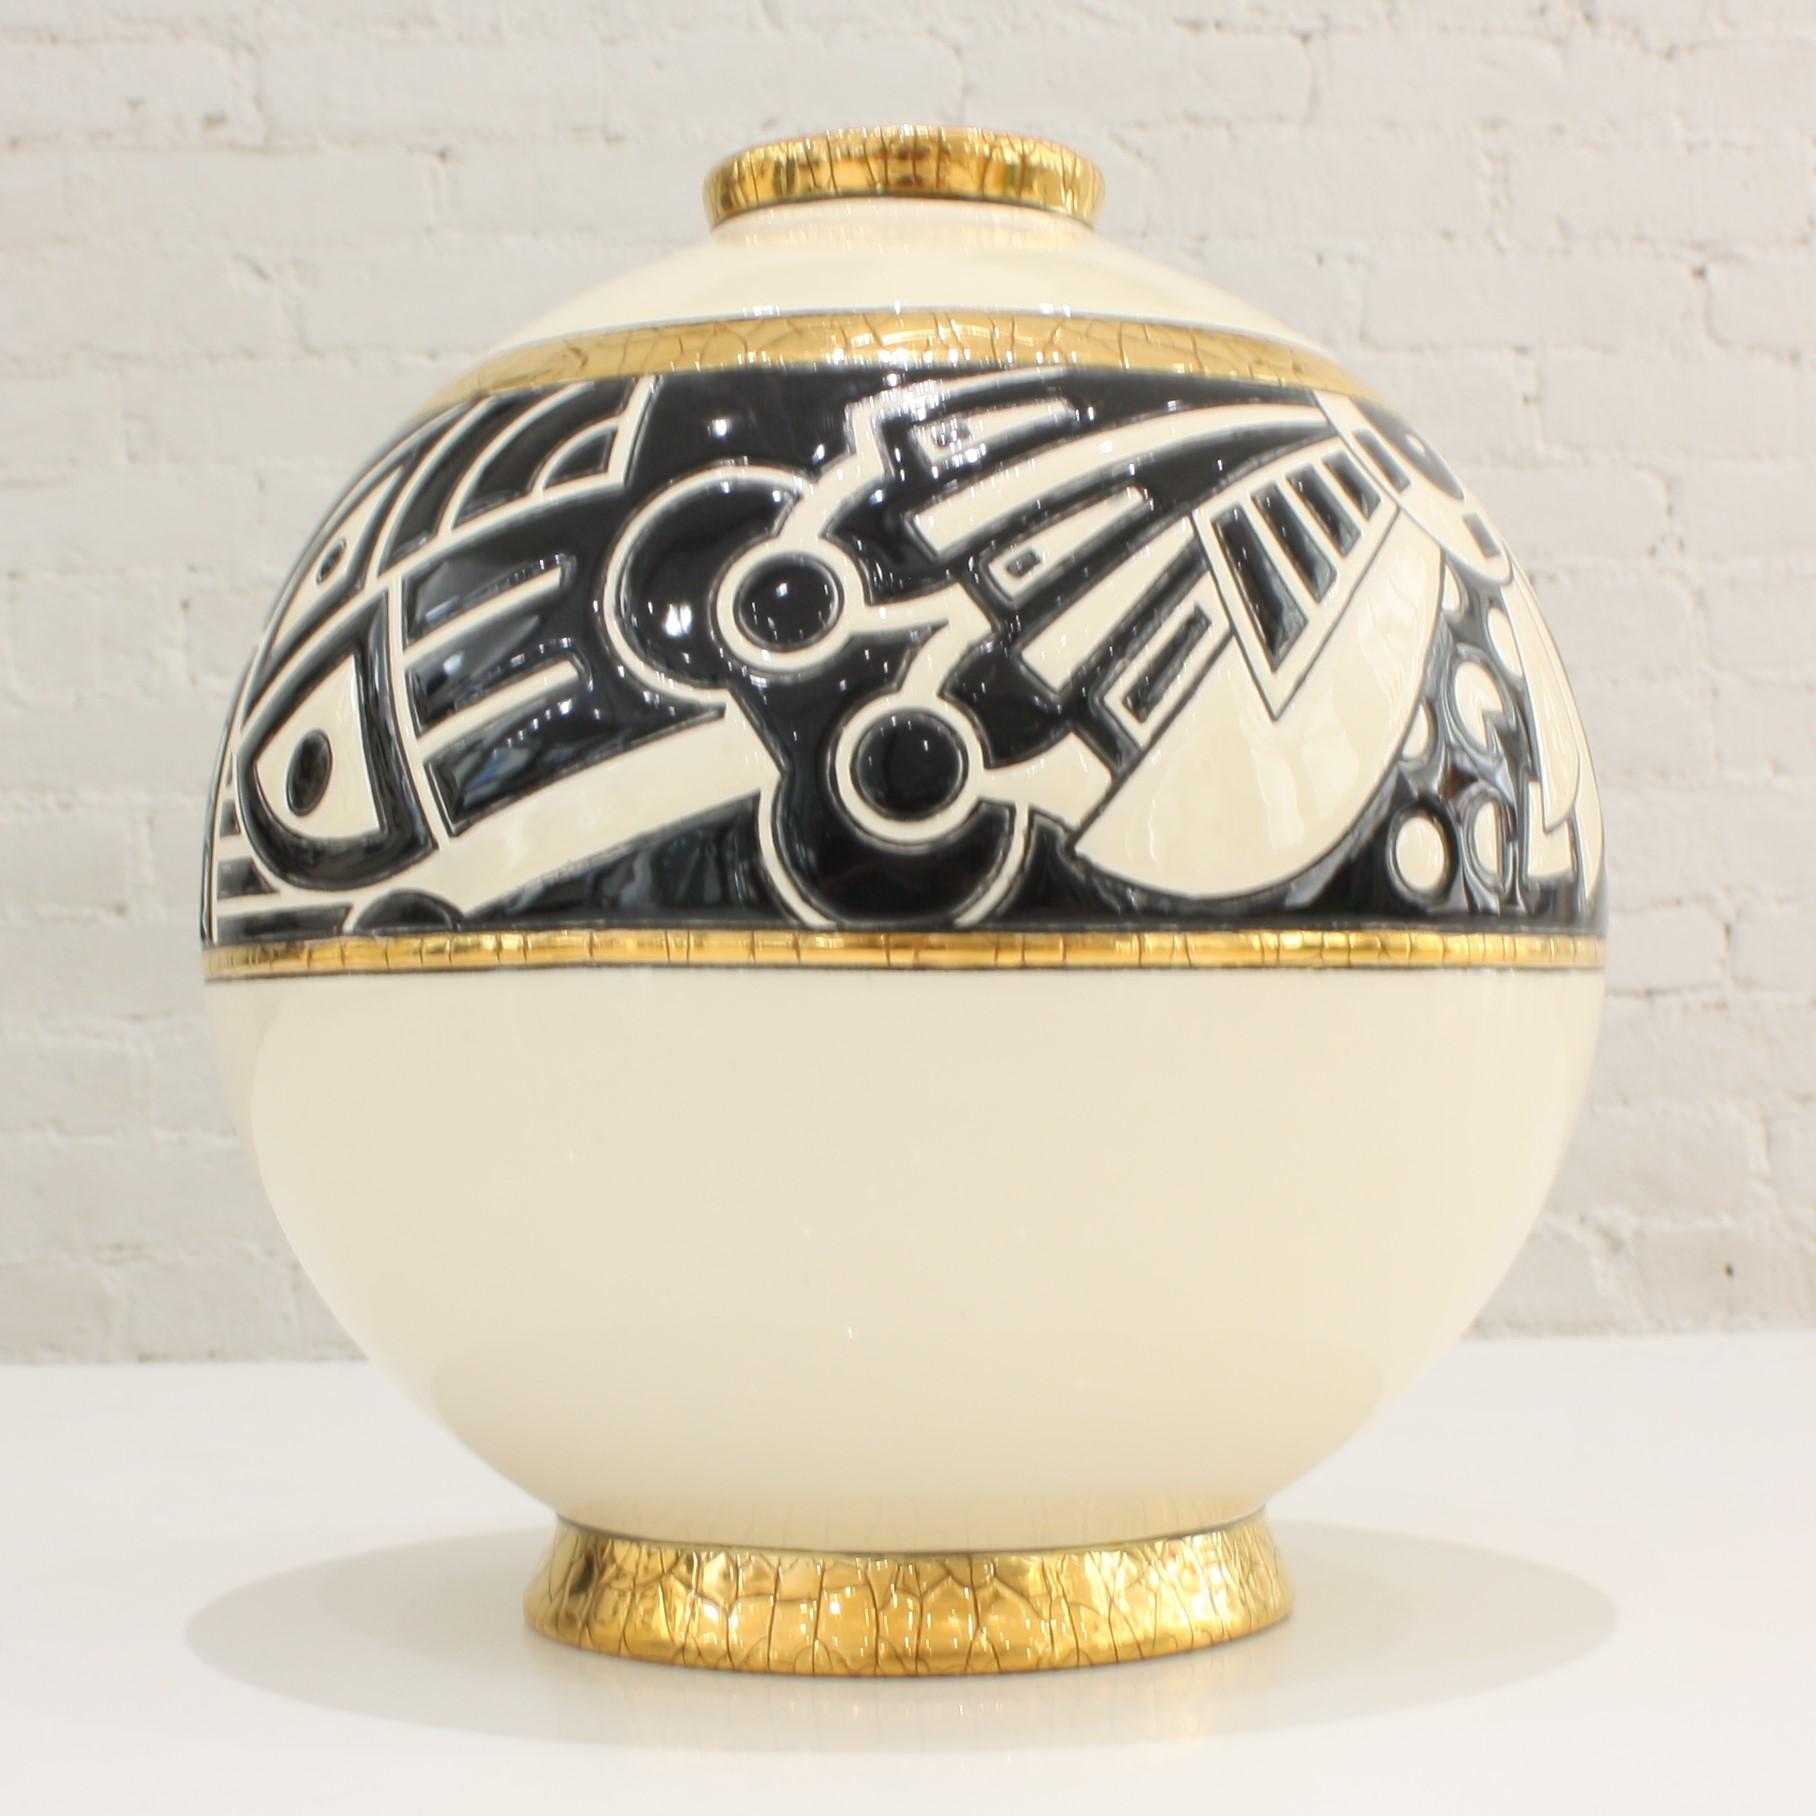 Superb round vase in Art Deco style. The artist Nicolas Blandin was commissioned by Les Emaux de Longwy to create this graphic design for their world famous Boule vases. Black and ivory tones highlighted by crackled gold leaf give a refined touch to